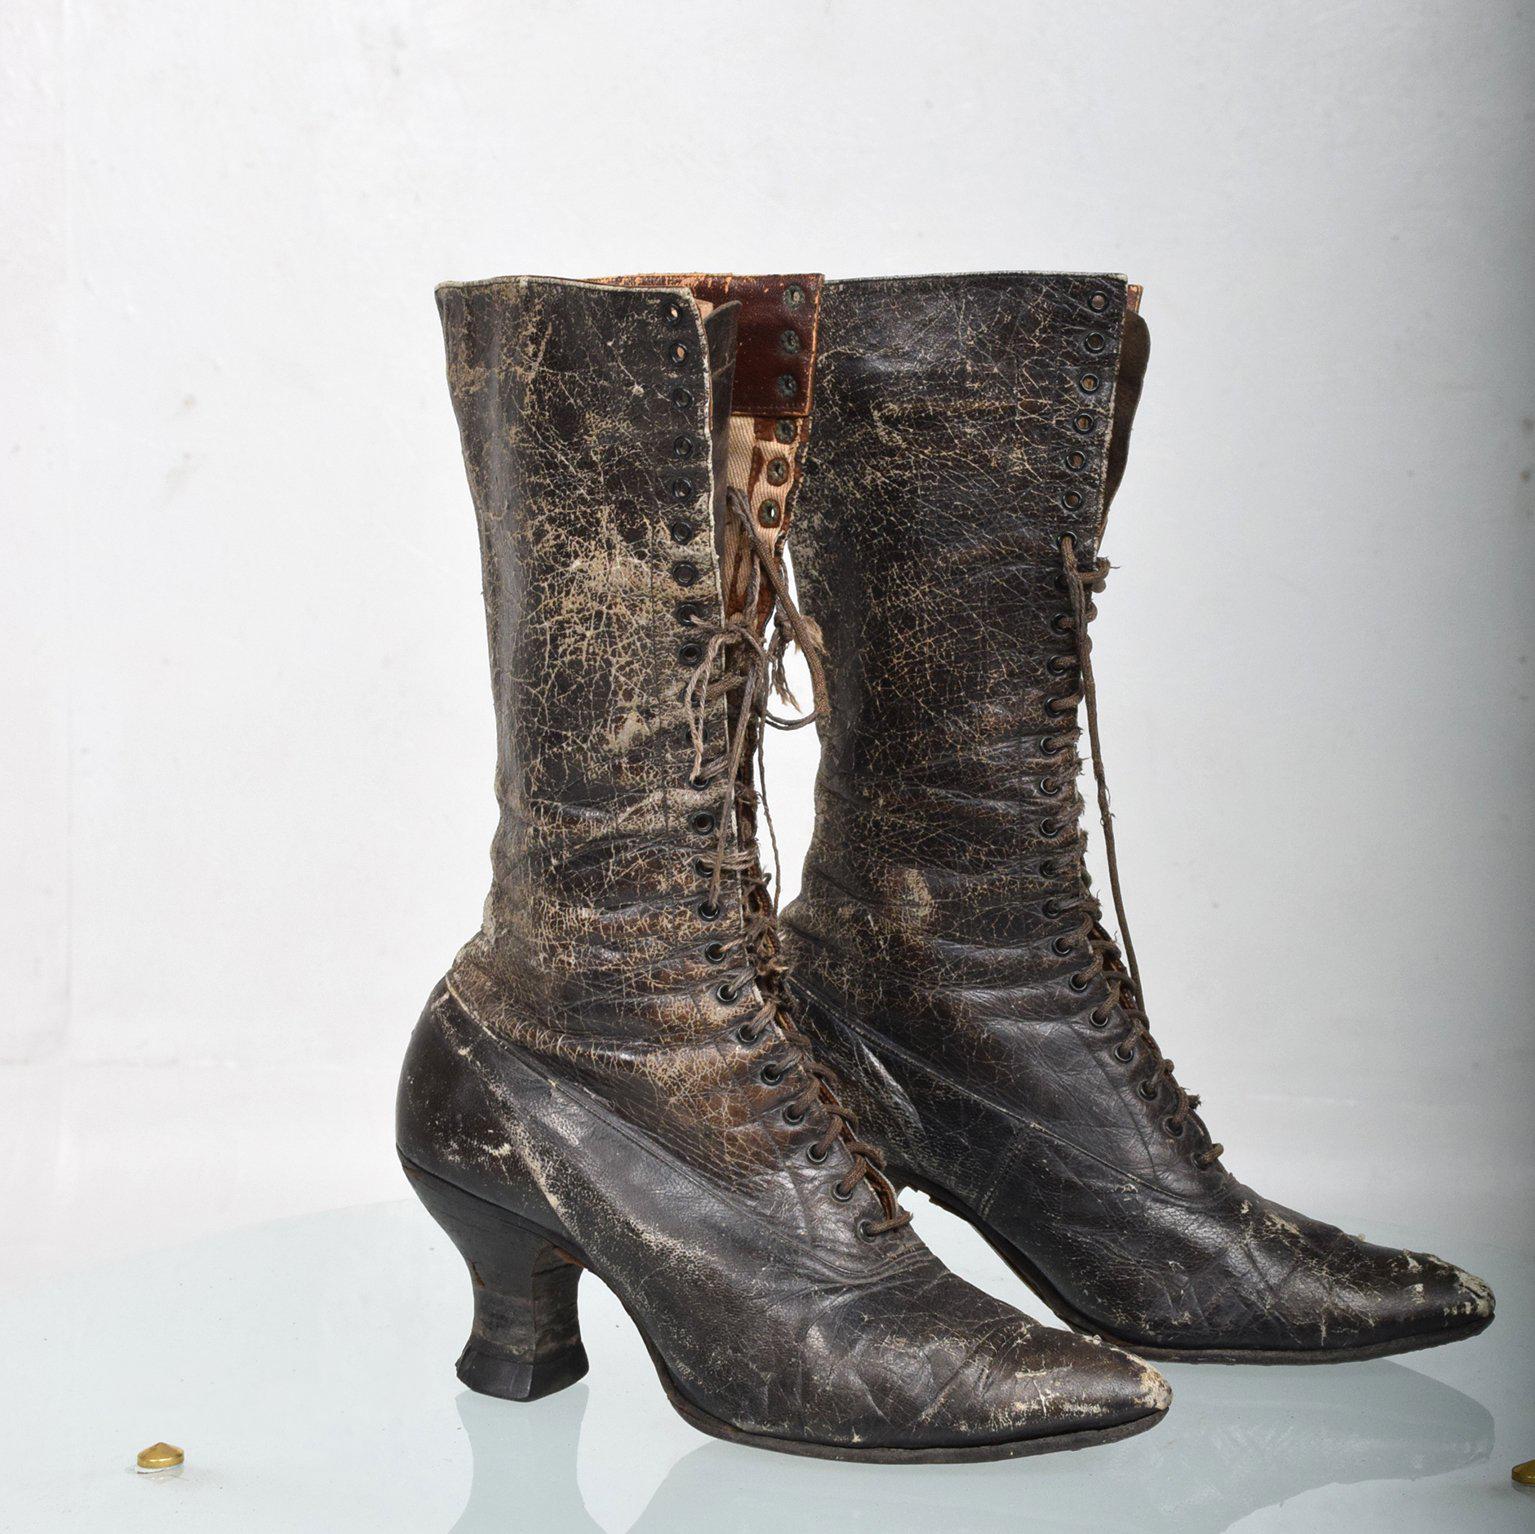 For your consideration a pair of antique leather boots for ladies.

Leather showing signs of obvious wear. The laces are more than likely original to the boots.

The condition of the boots have a great vintage character. Unrestored.
Great